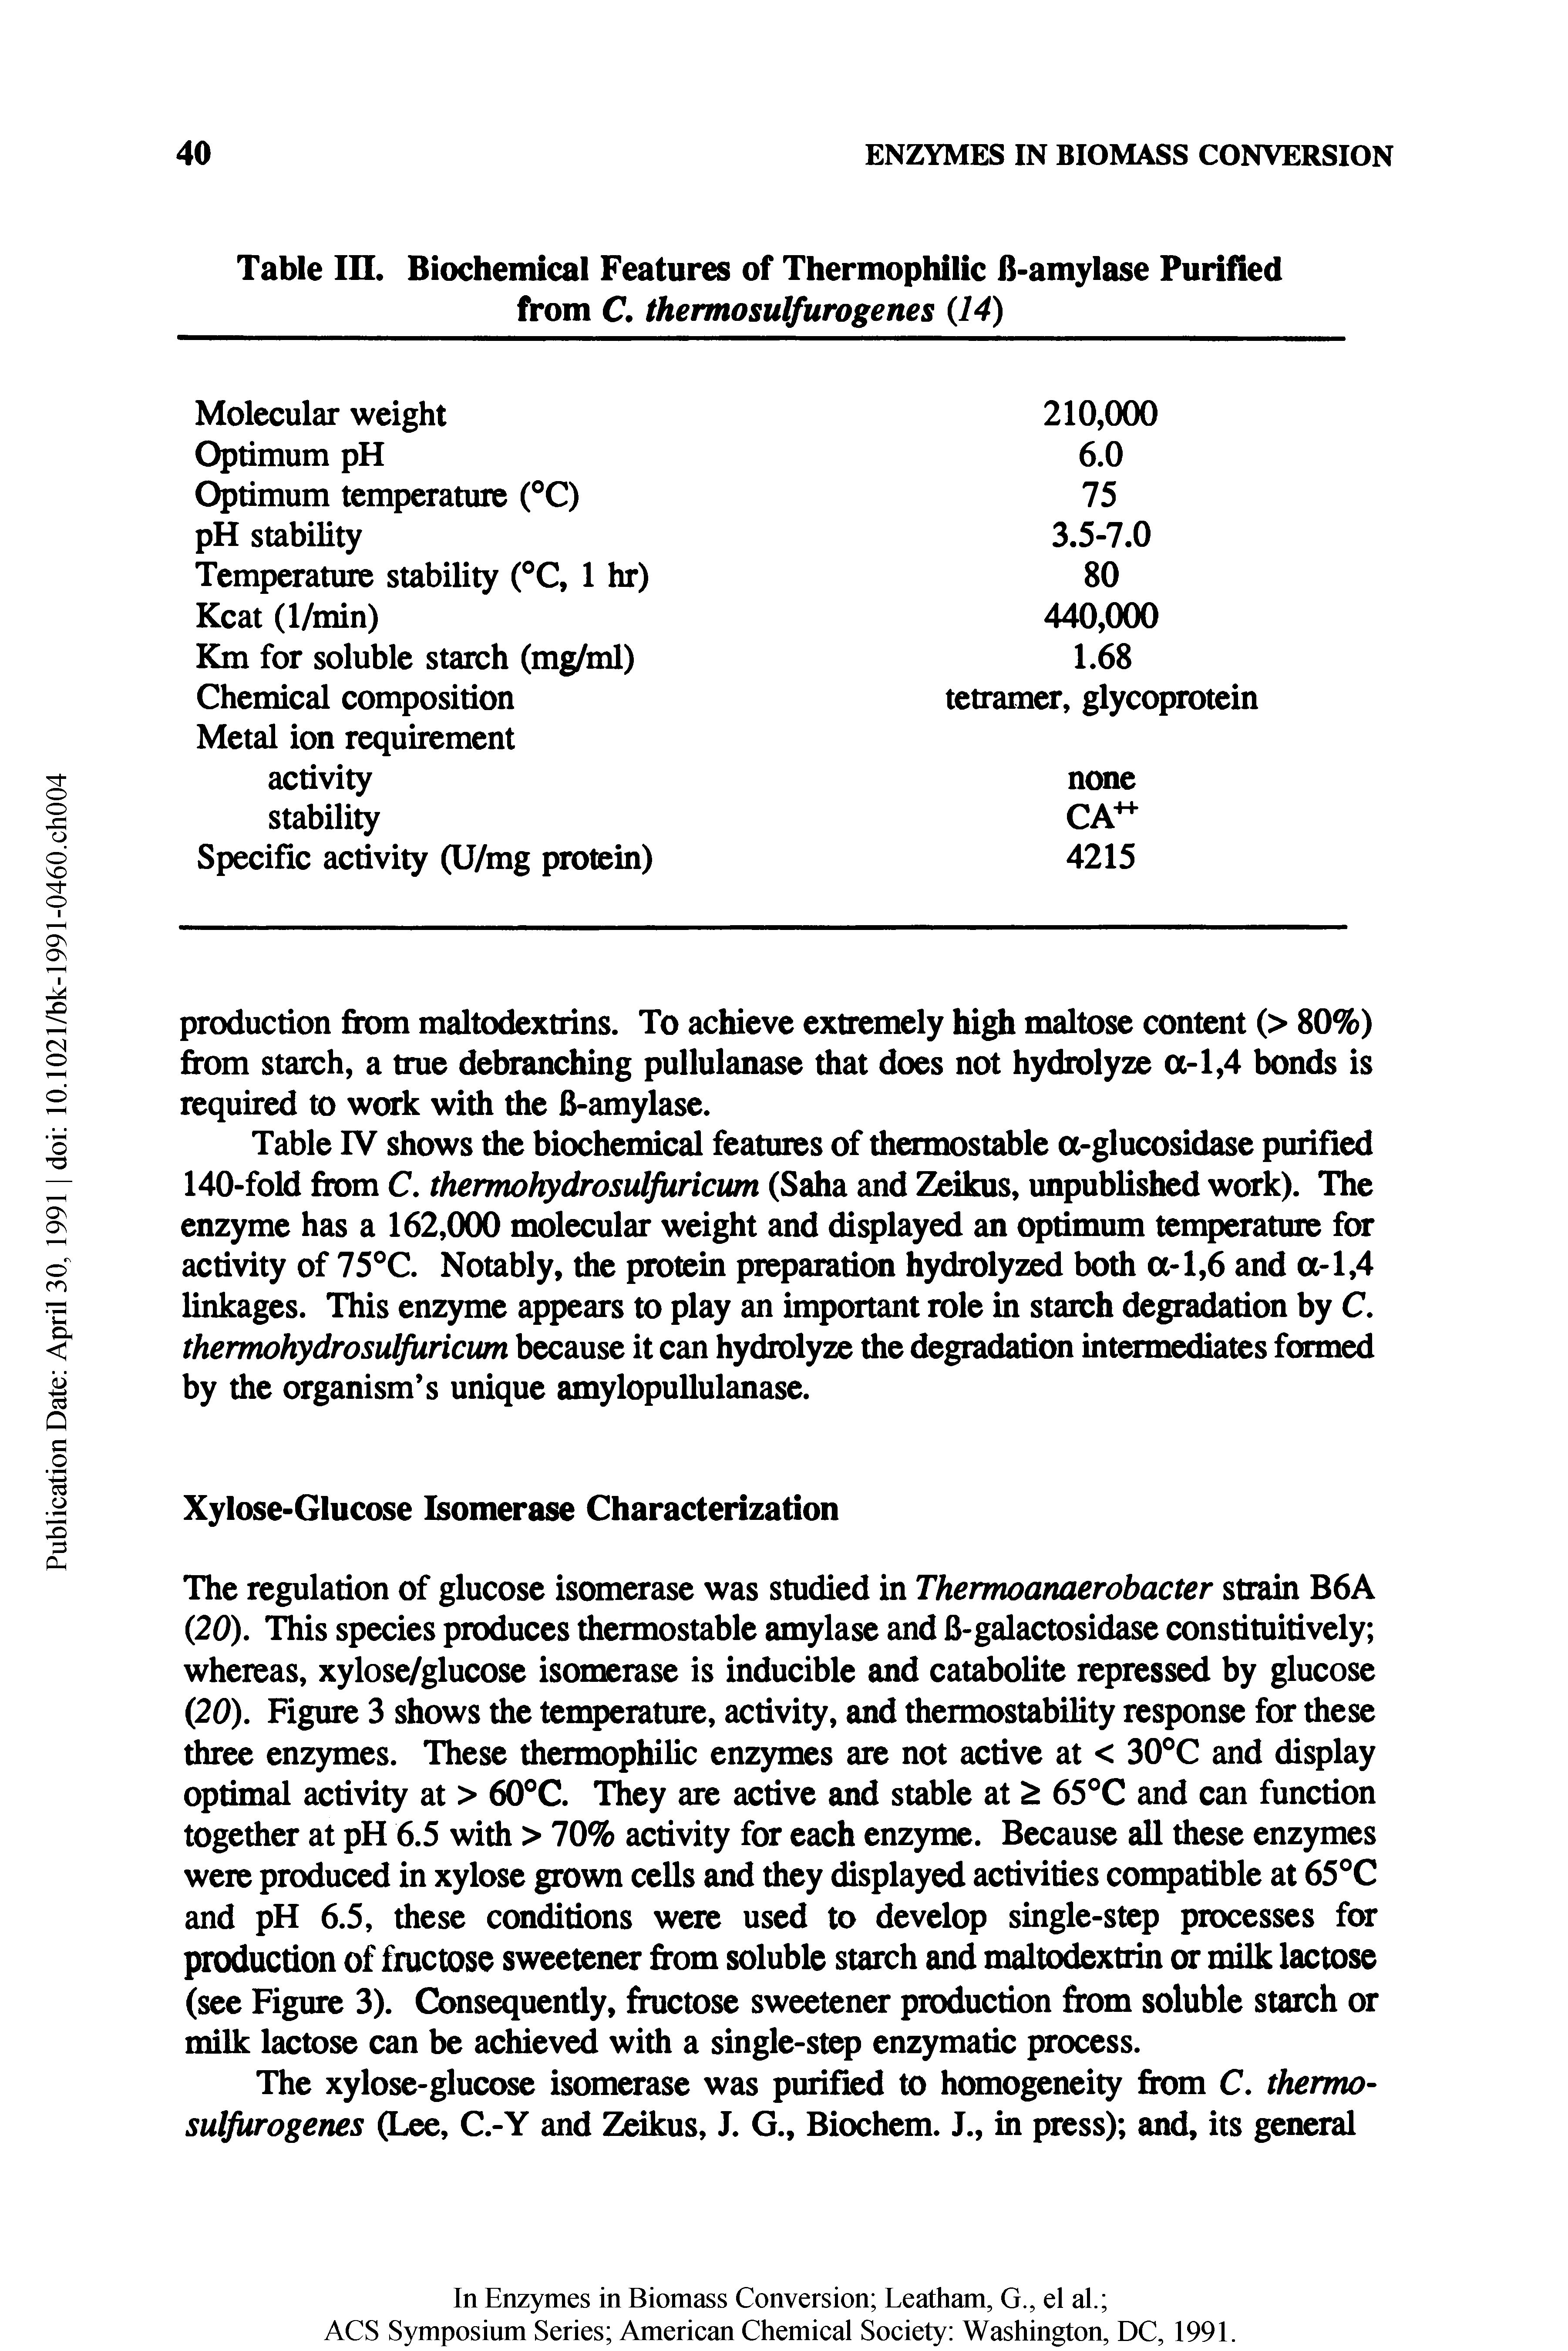 Table IV shows the biochemical features of thomostable a-glucosidase purified 140-fold from C. thermohydrosulfuricum (Saha and Zeikus, unpublished work). The enzyme has a 162,000 molecular weight and displayed an optimum temperature for activity of 75°C. Notably, the protein preparation hydrolyzed both a-1,6 and a-1,4 linkages. This enzyme appears to play an important role in starch degradation by C. thermohydrosulfuricum because it can hydrolyze the degradation intermediates formed by the organism s unique amylopullulanase.